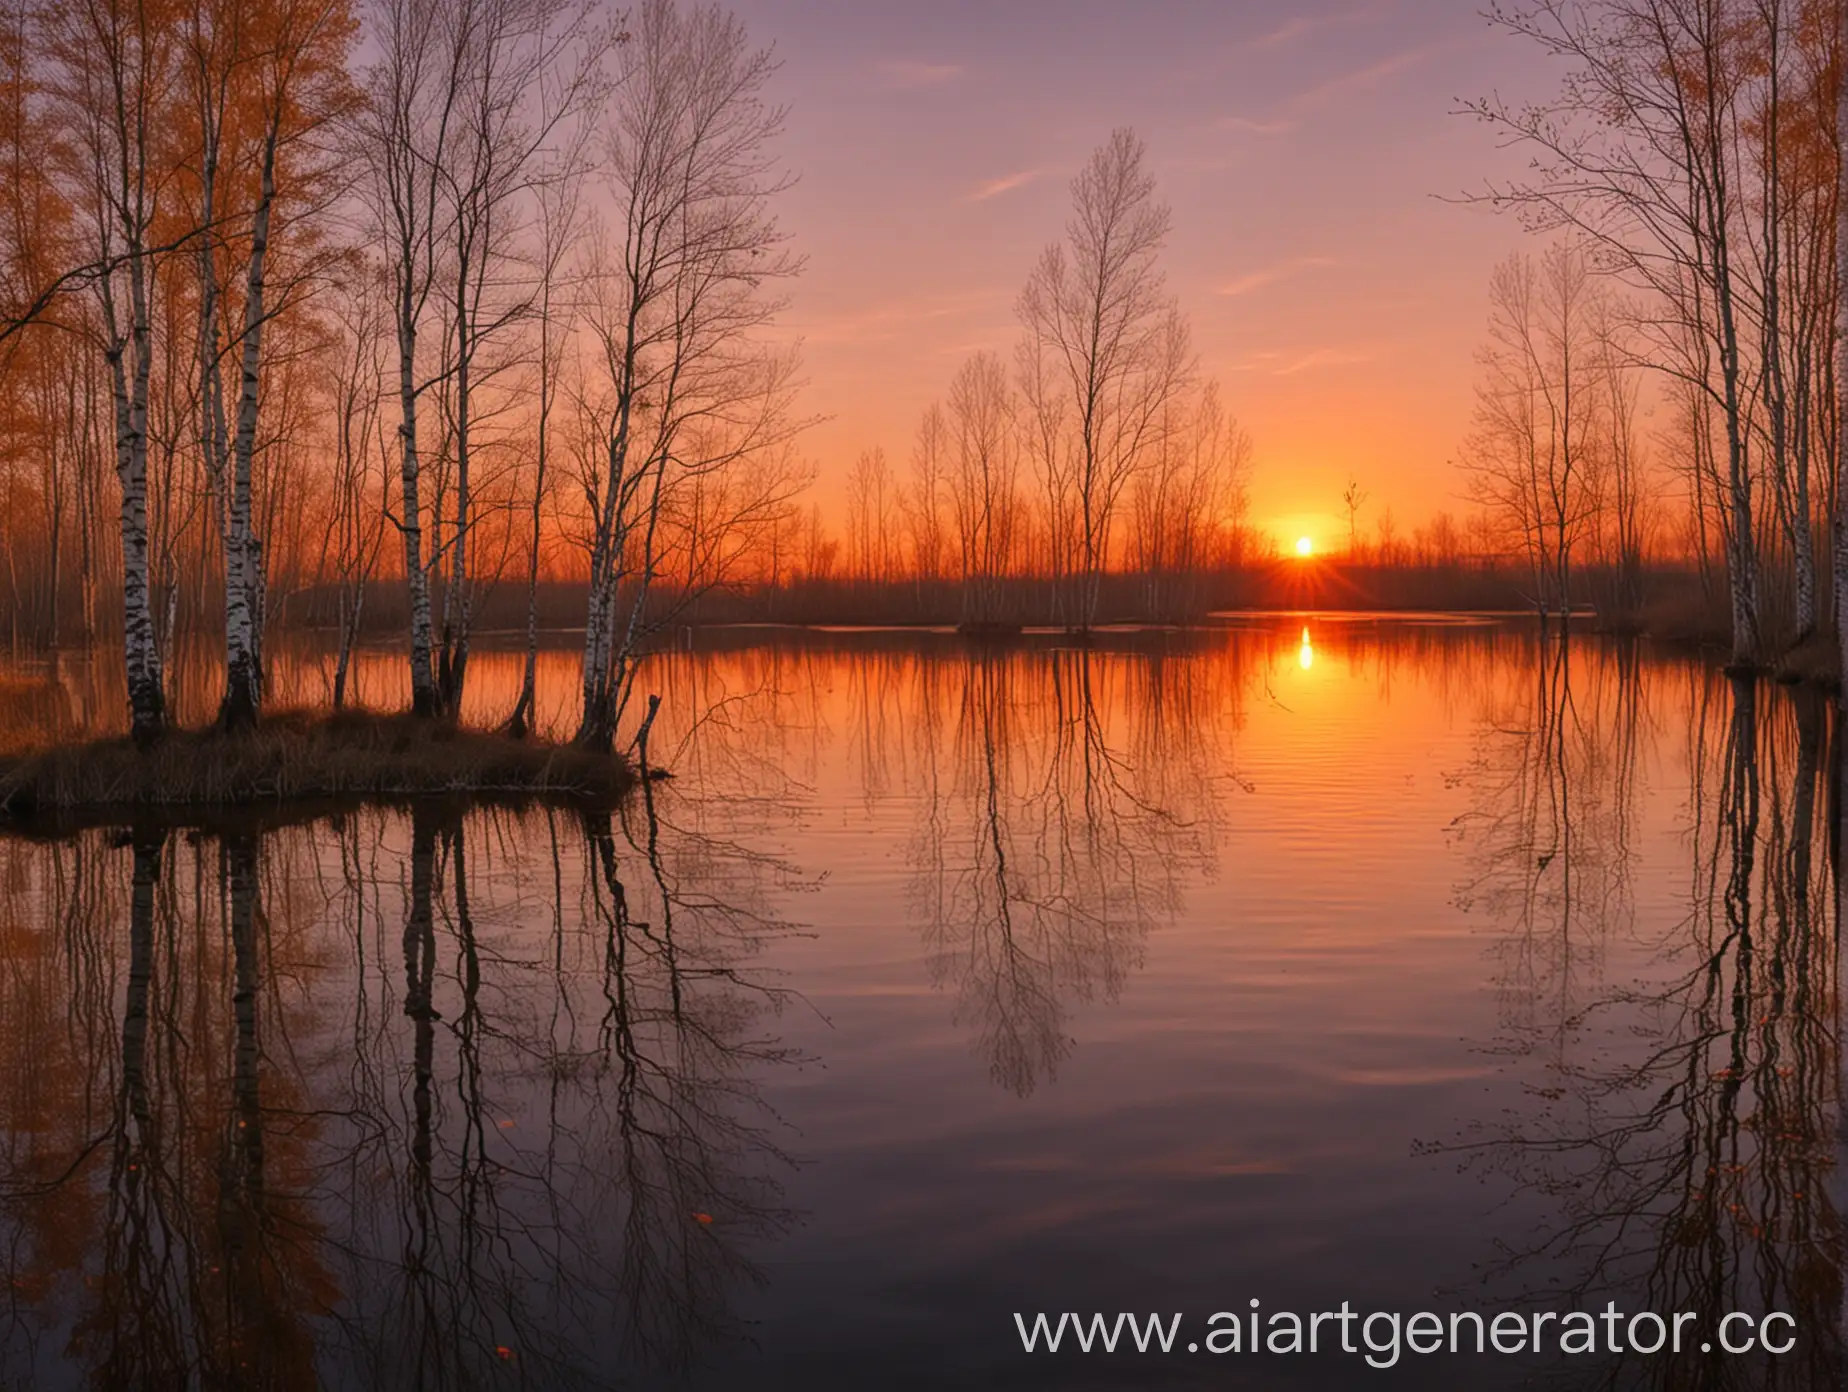 Tranquil-Sunset-Over-a-Red-Sunlit-Lake-with-Rare-Birch-Trees